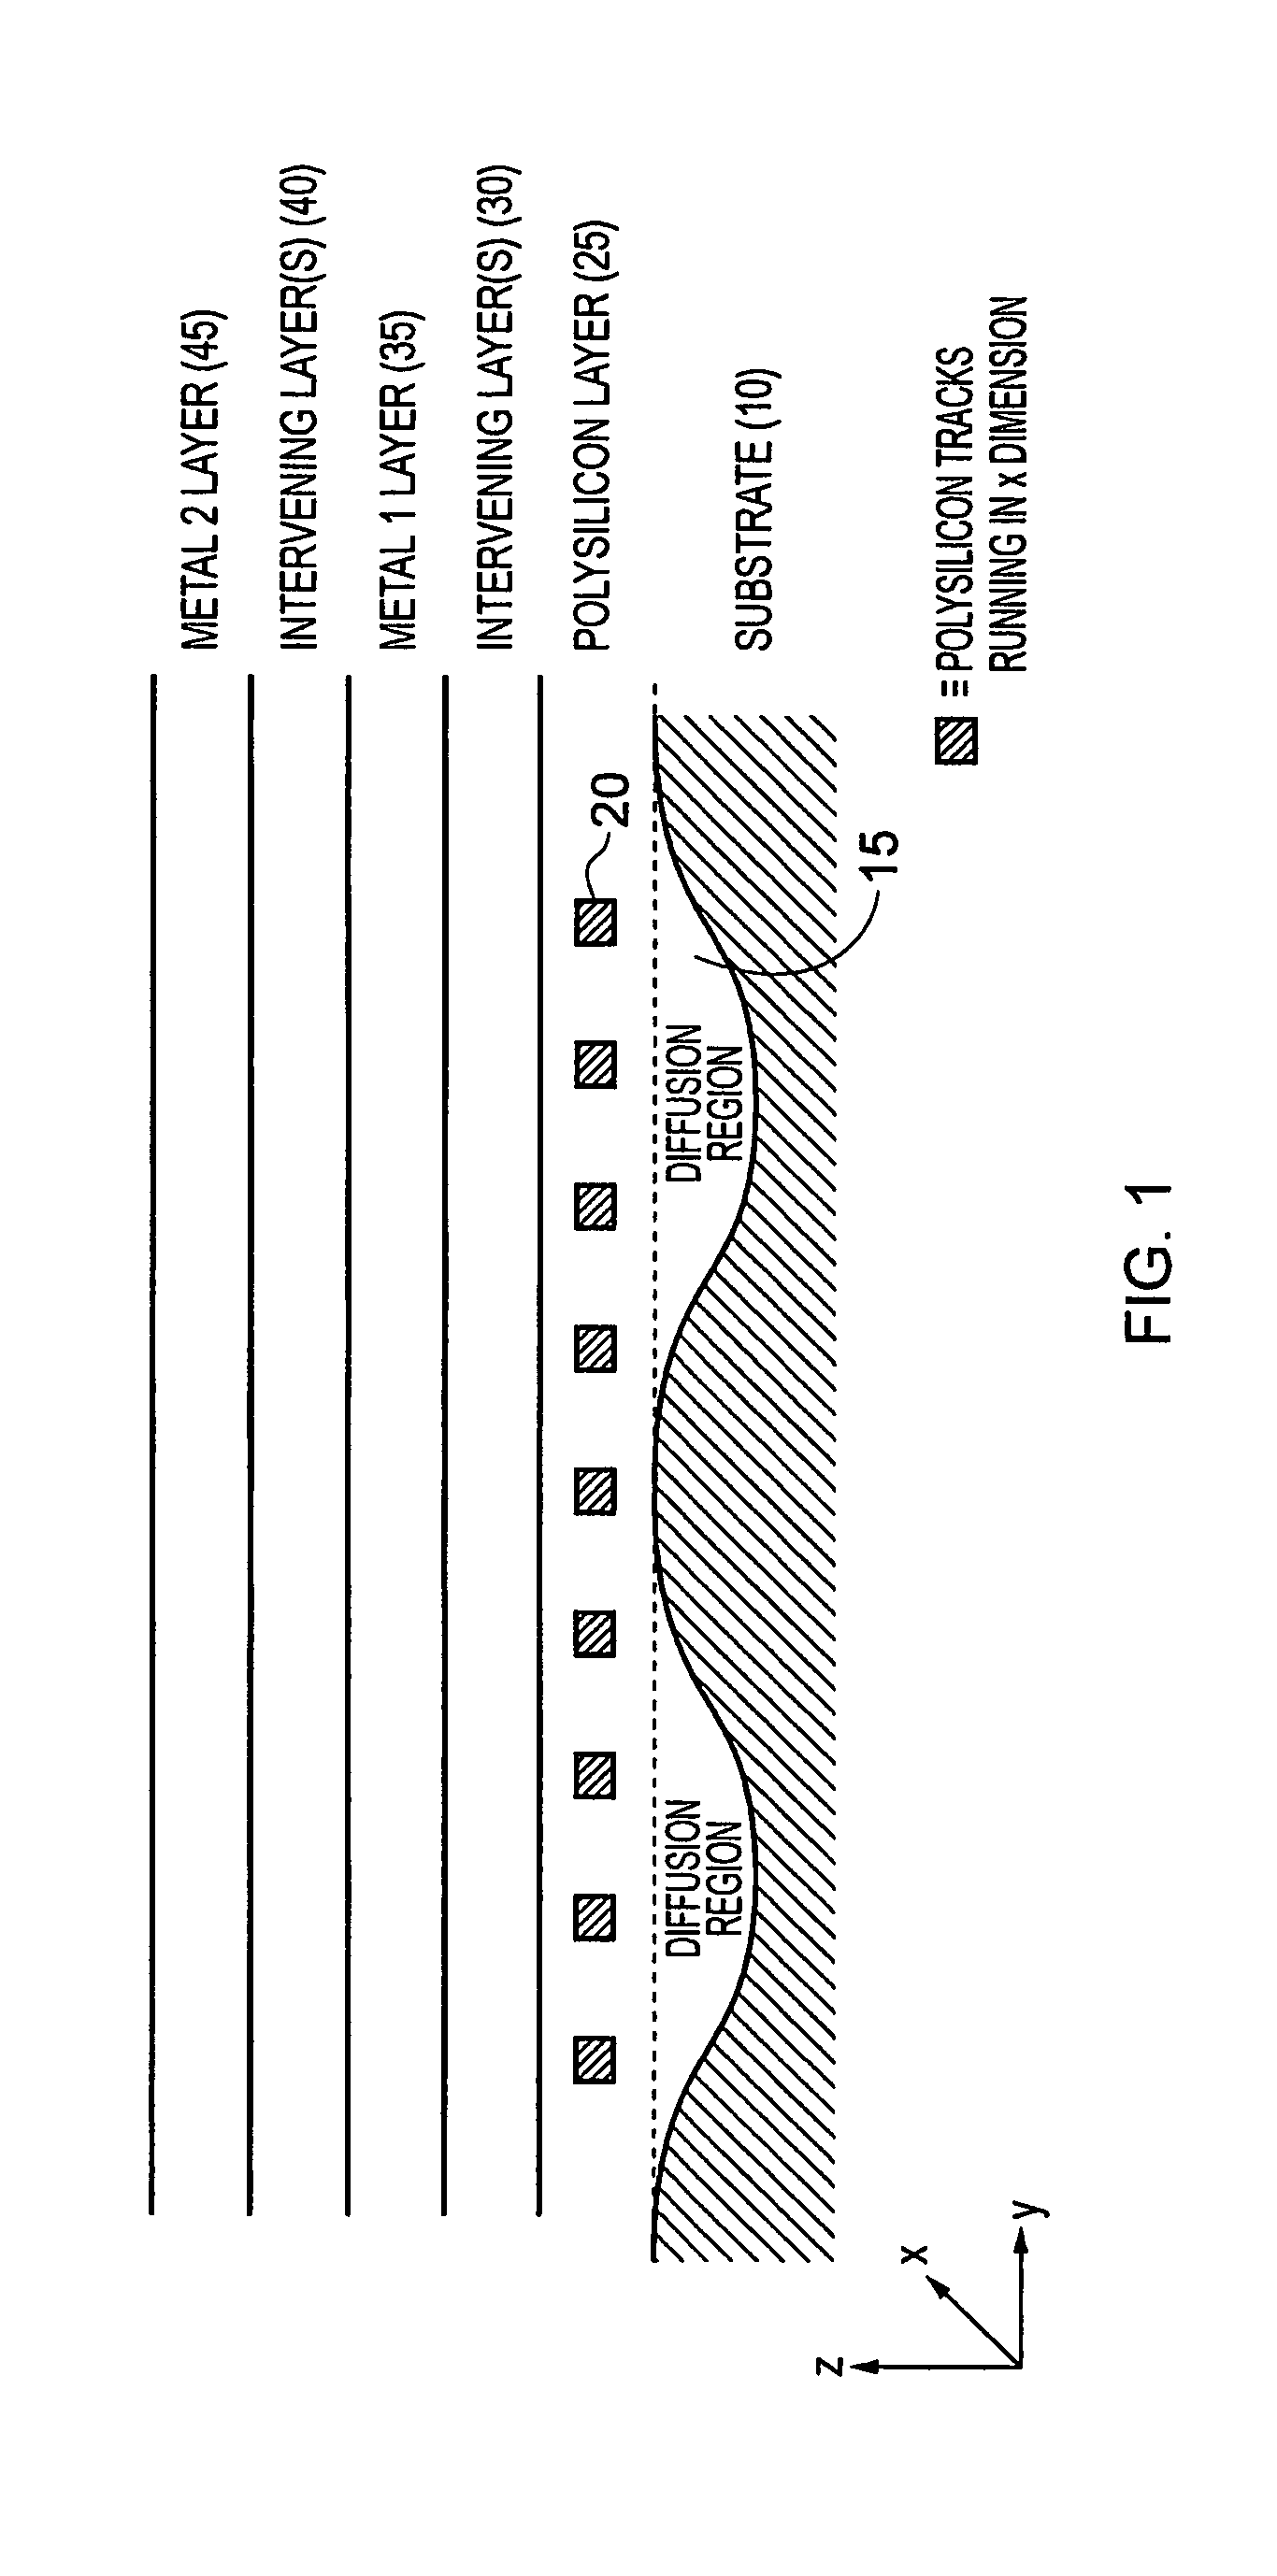 Method of generating a layout of an integrated circuit comprising both standard cells and at least one memory instance